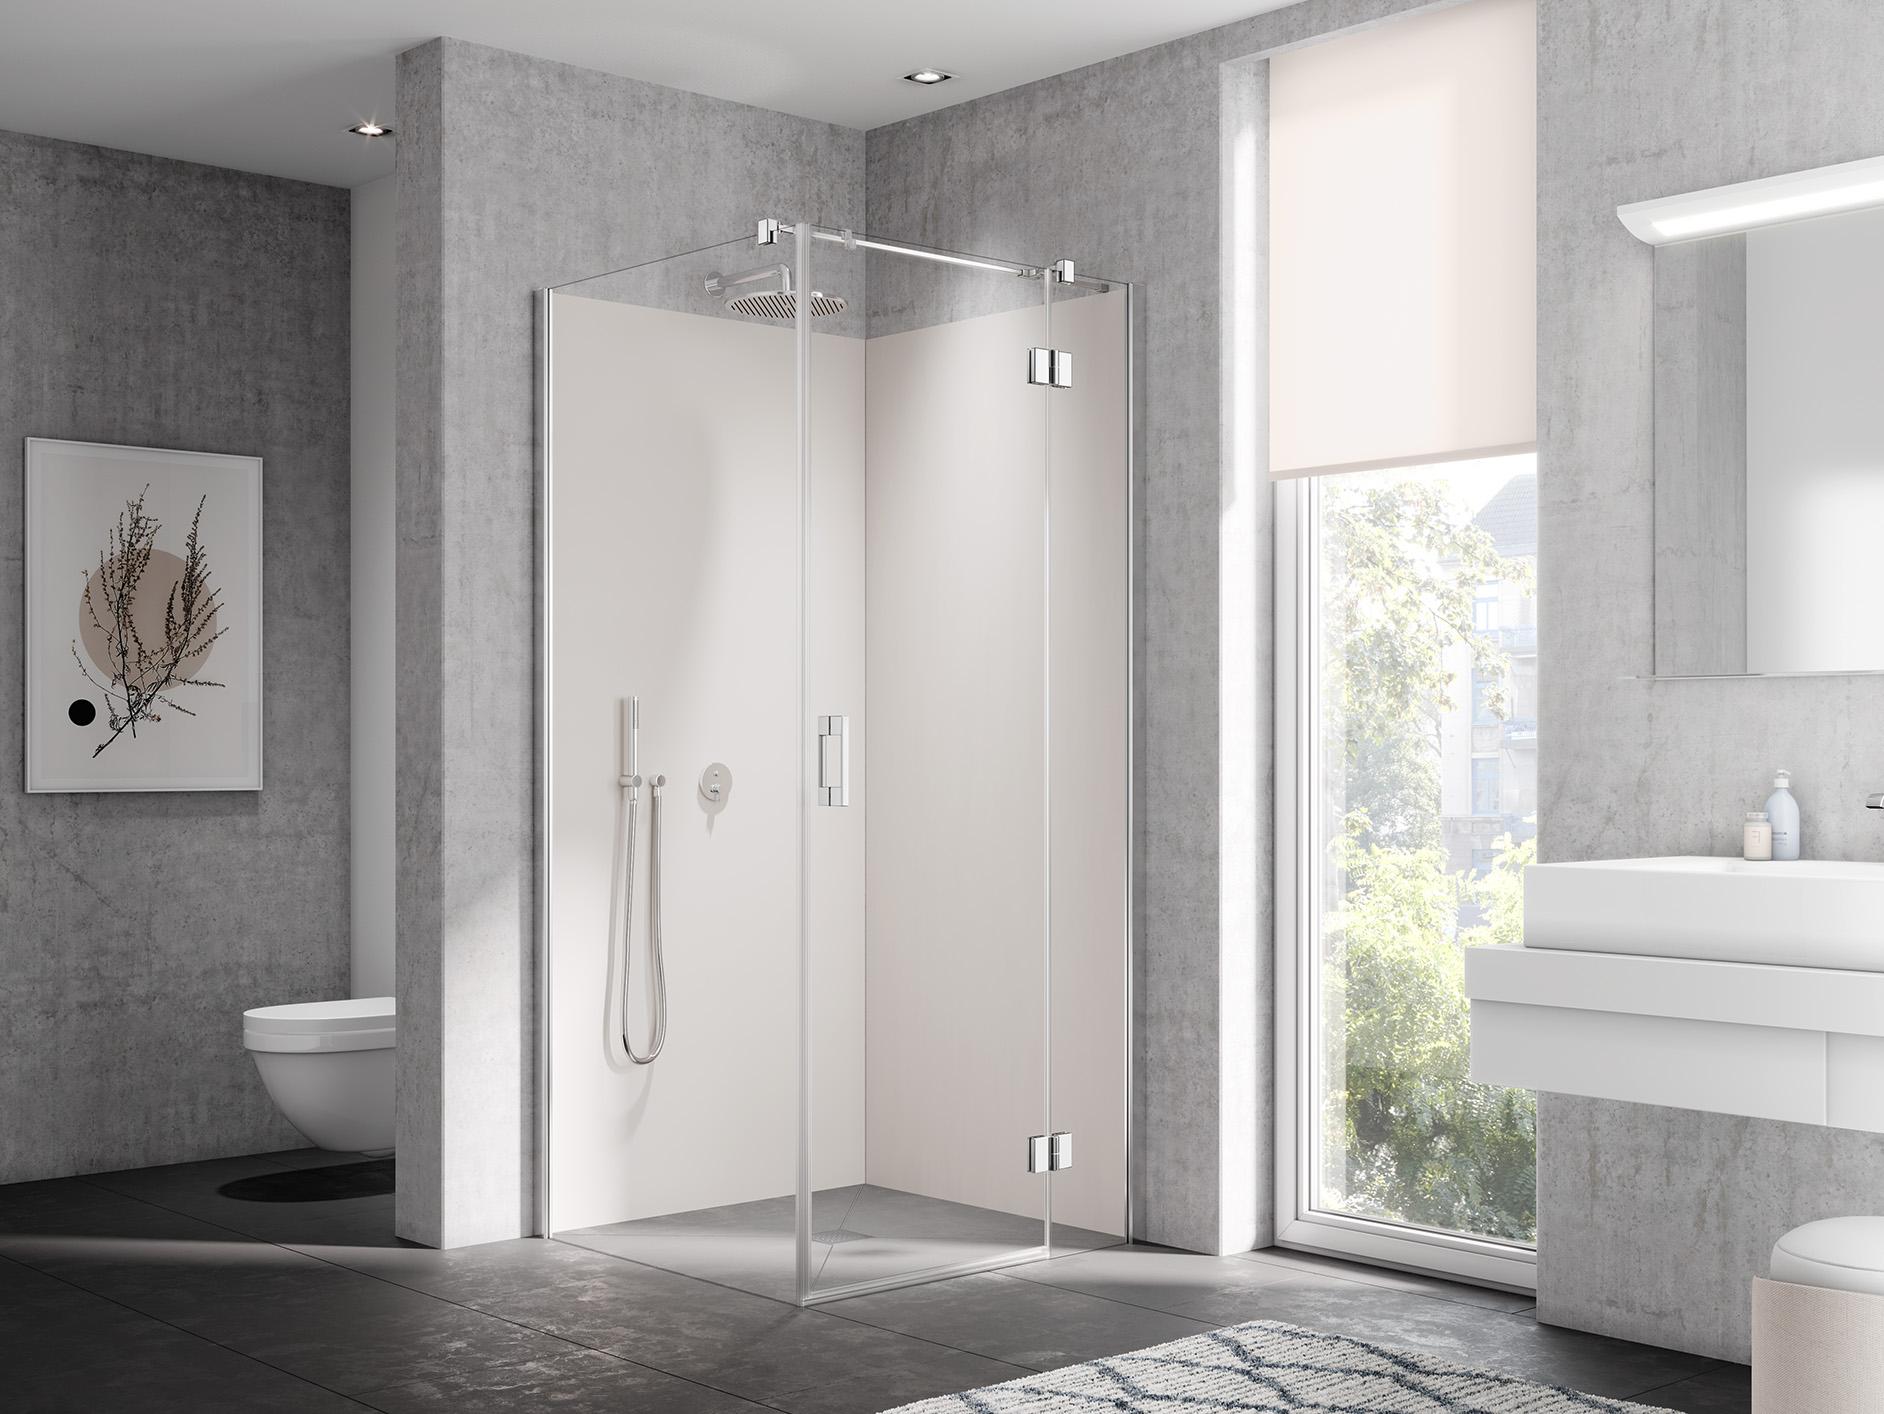 Kermi profile shower enclosure, LIGA hinged door with fixed panel and side wall with wall profile